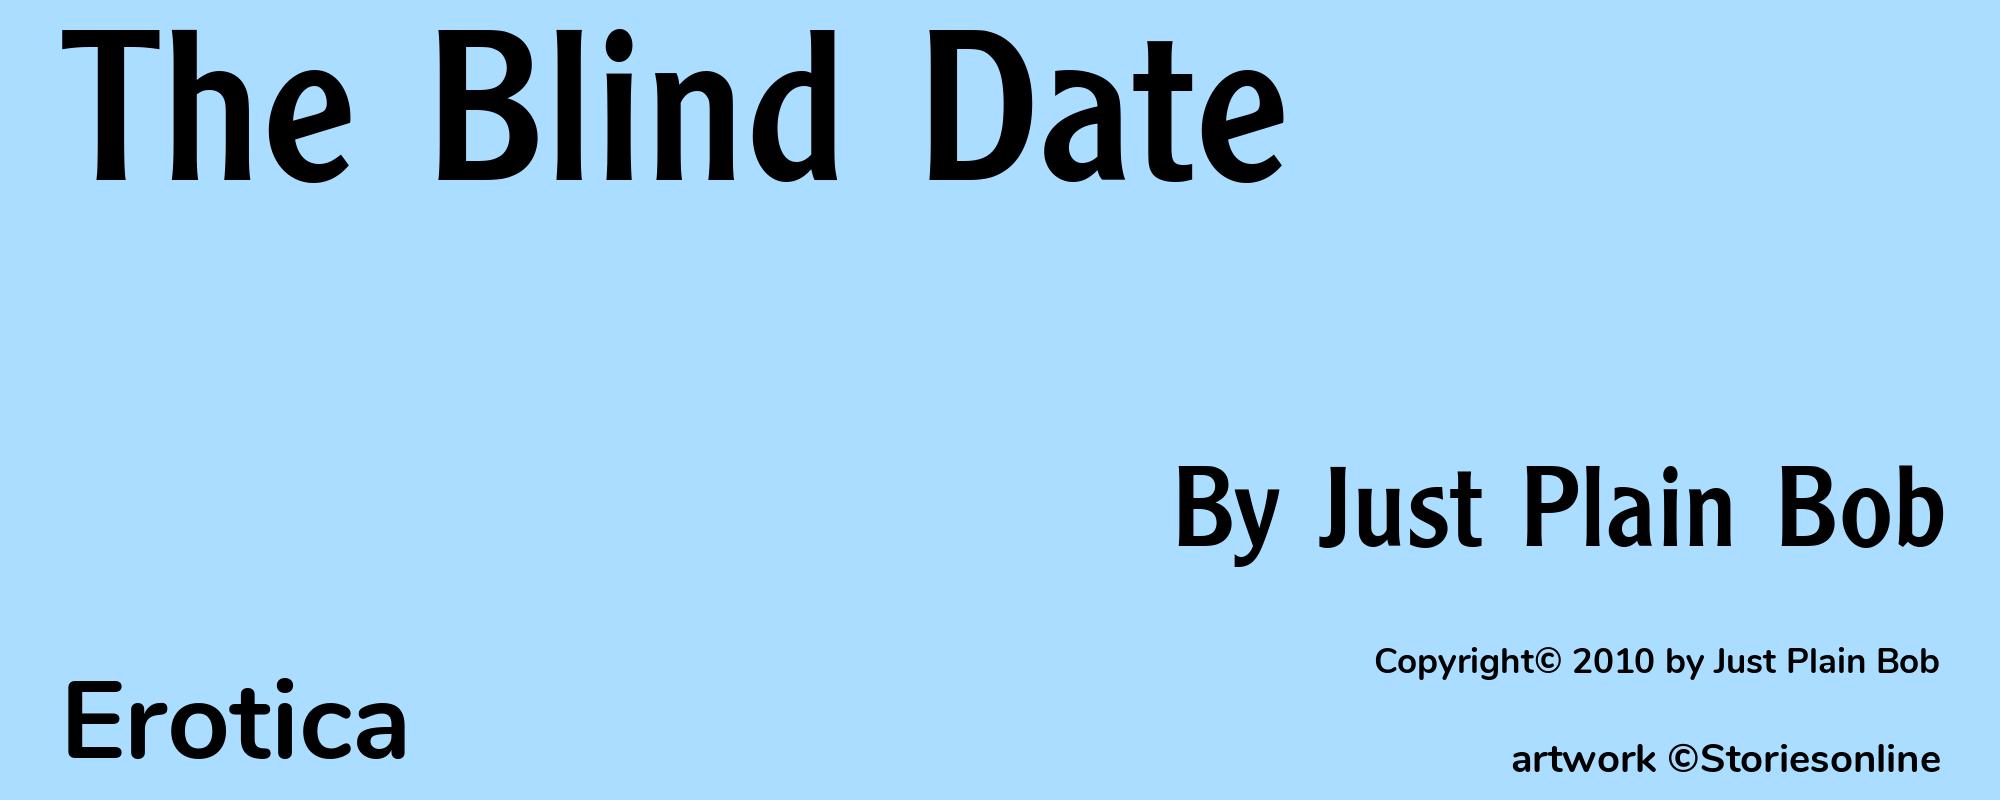 The Blind Date - Cover